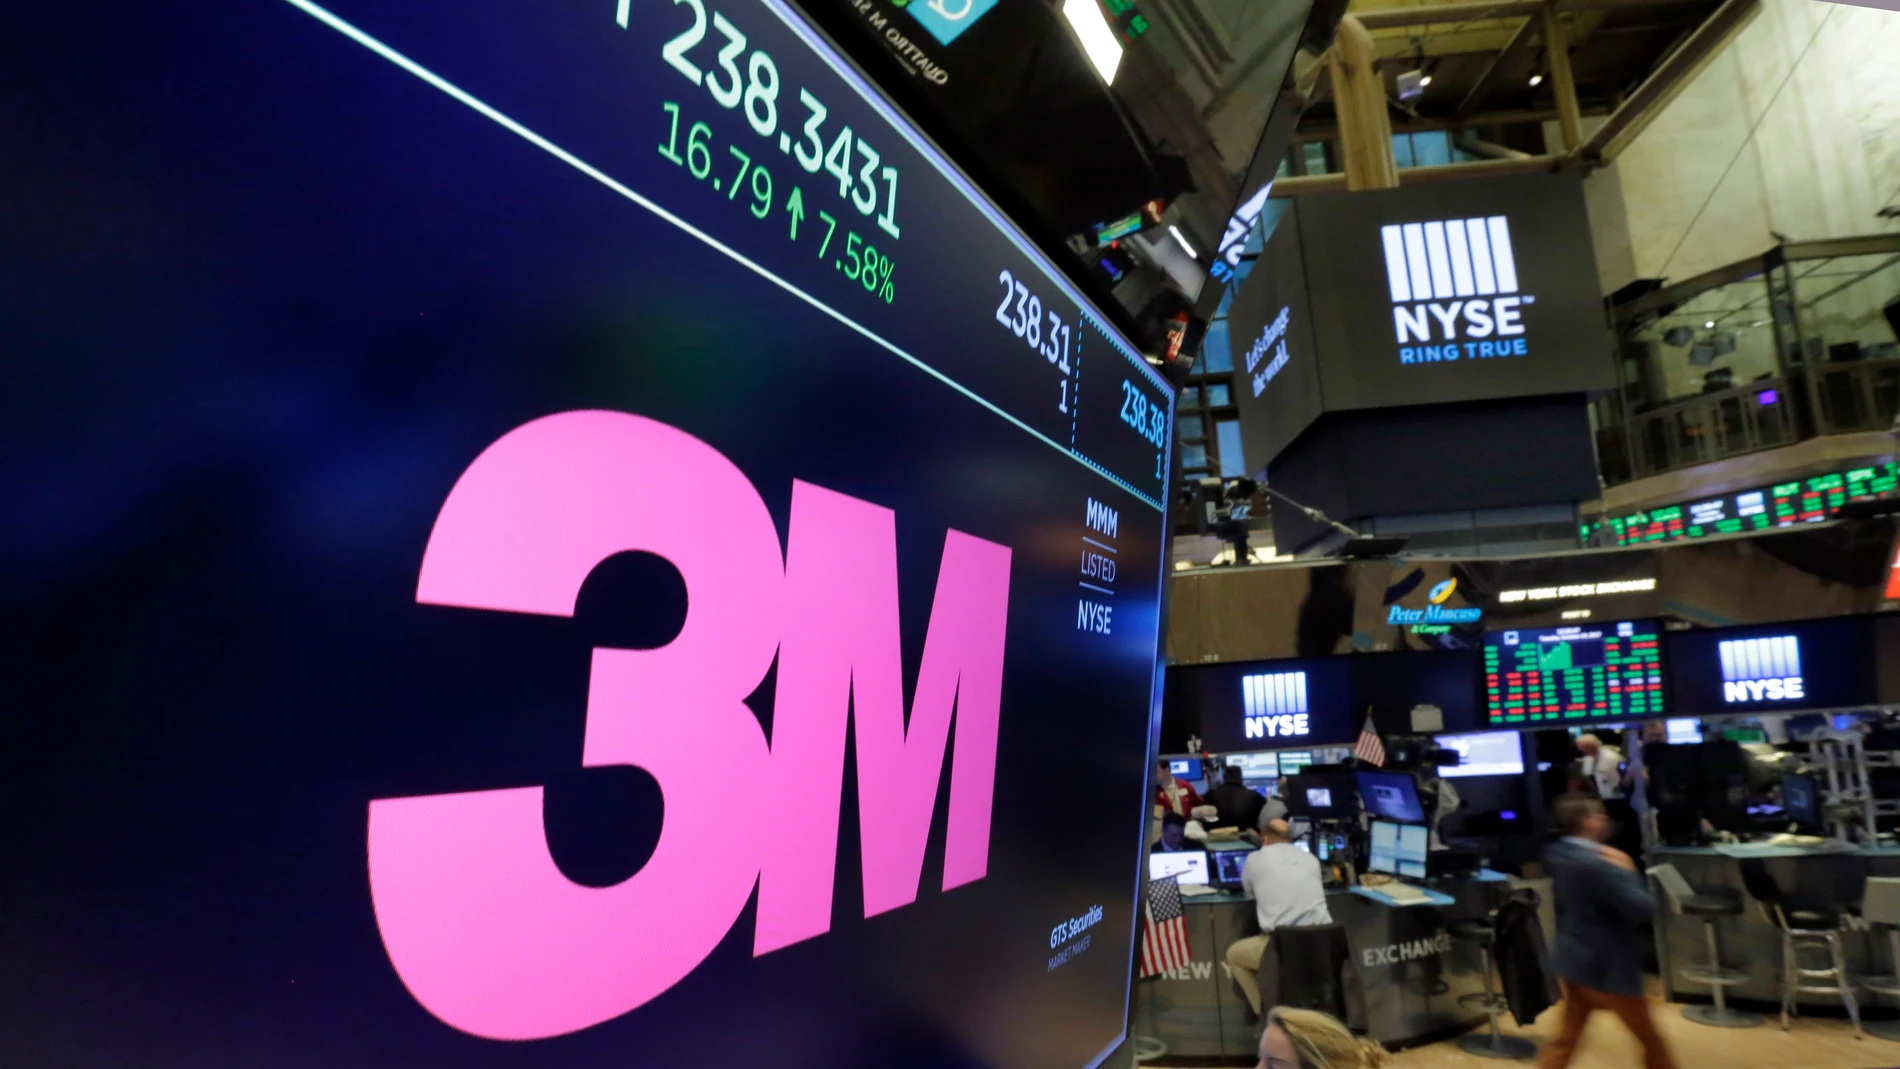 FILE - The logo for 3M appears on a screen above the trading floor of the New York Stock Exchange, Oct. 24, 2017. 3M, on Tuesday, Aug. 29, 2023, has agreed to pay $6 billion to settle numerous lawsuits from U.S. service members who say they experienced hearing loss or other serious injuries from using earplugs made by the company. (AP Photo/Richard Drew, File)